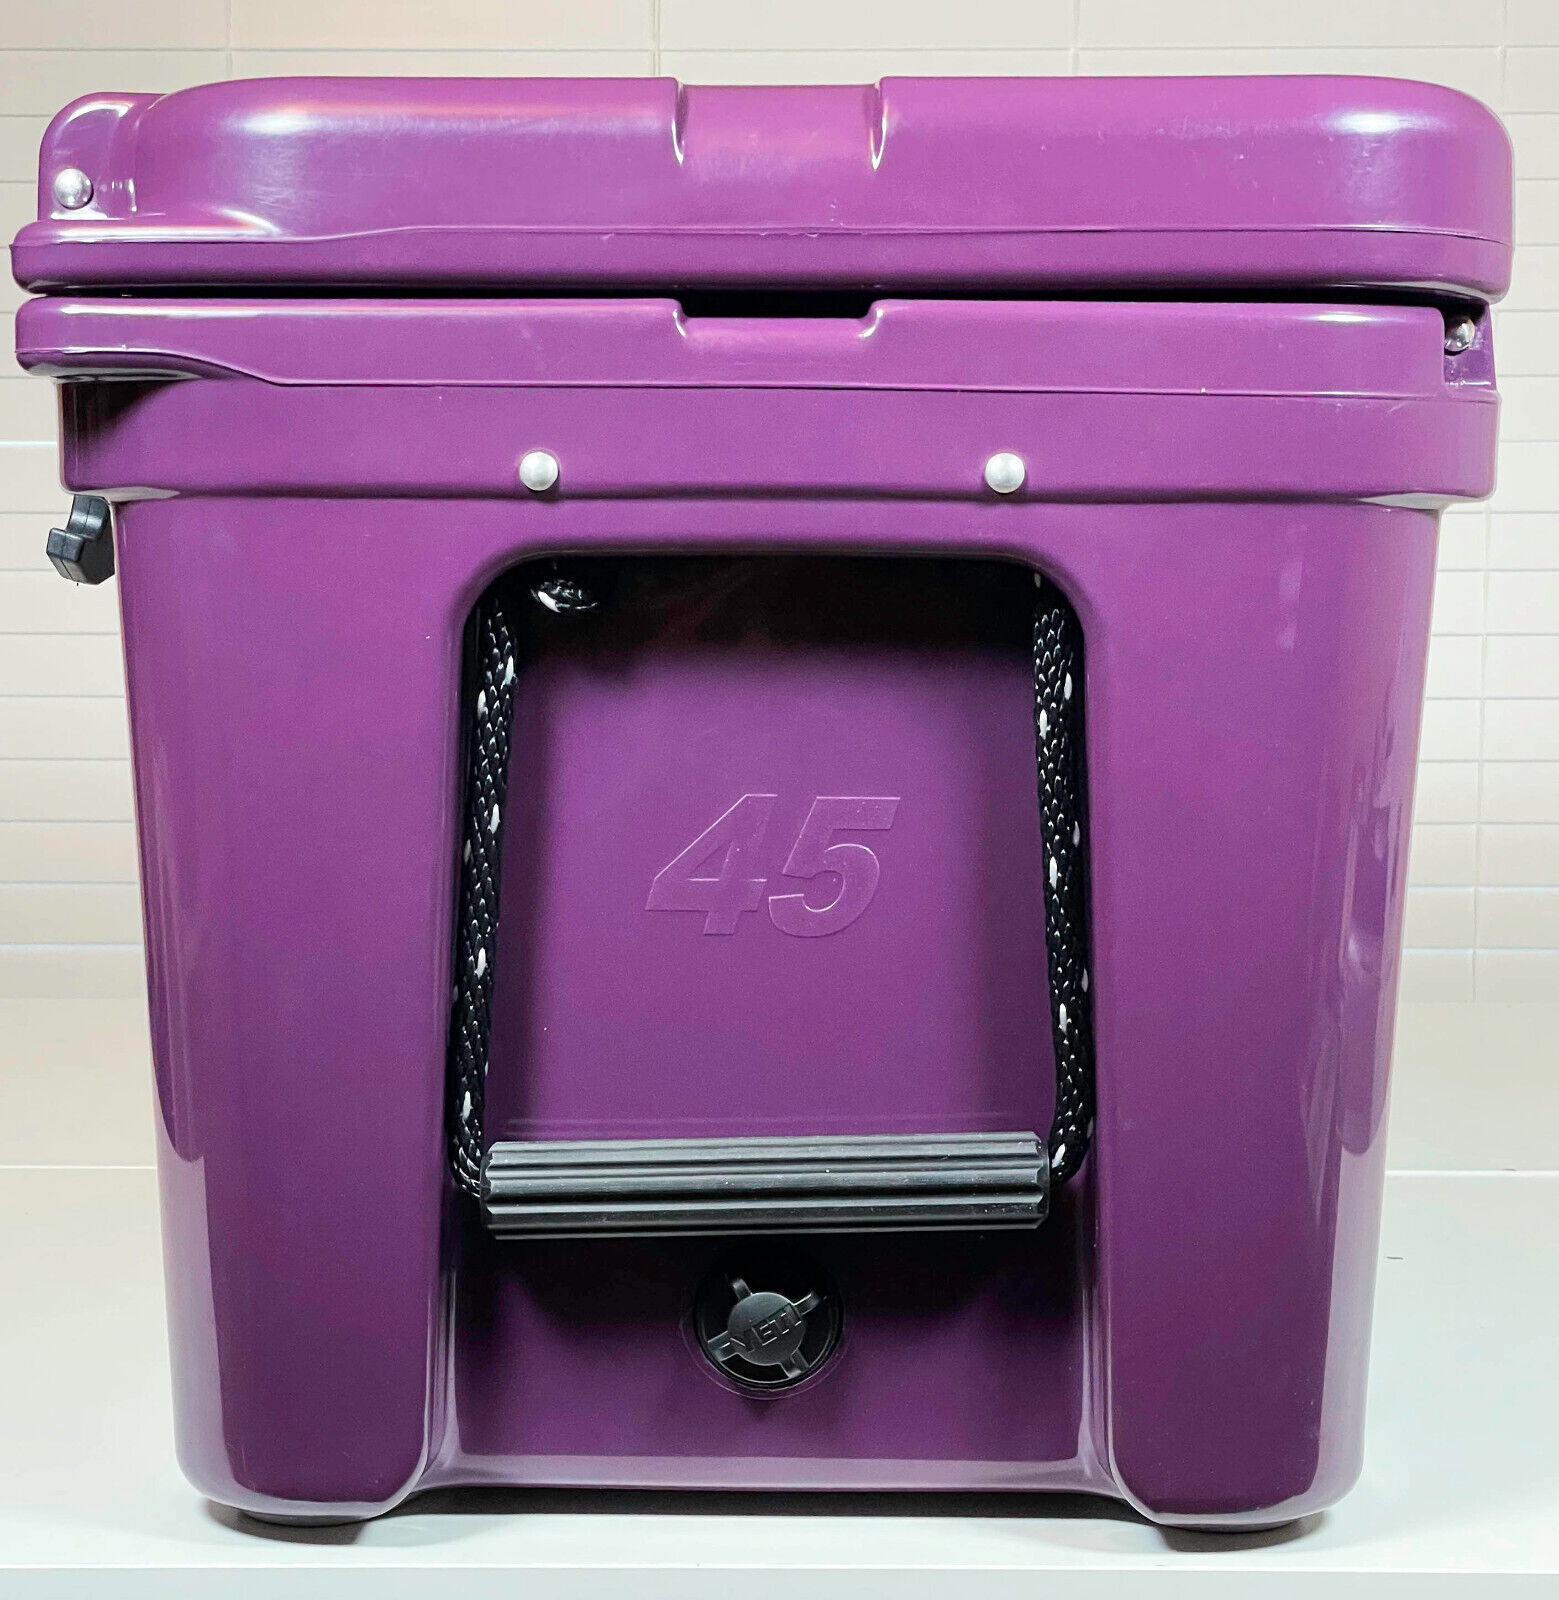 YETI TUNDRA 45 LIMITED EDITION NORDIC PURPLE HARD COOLER; NEW IN BOX!